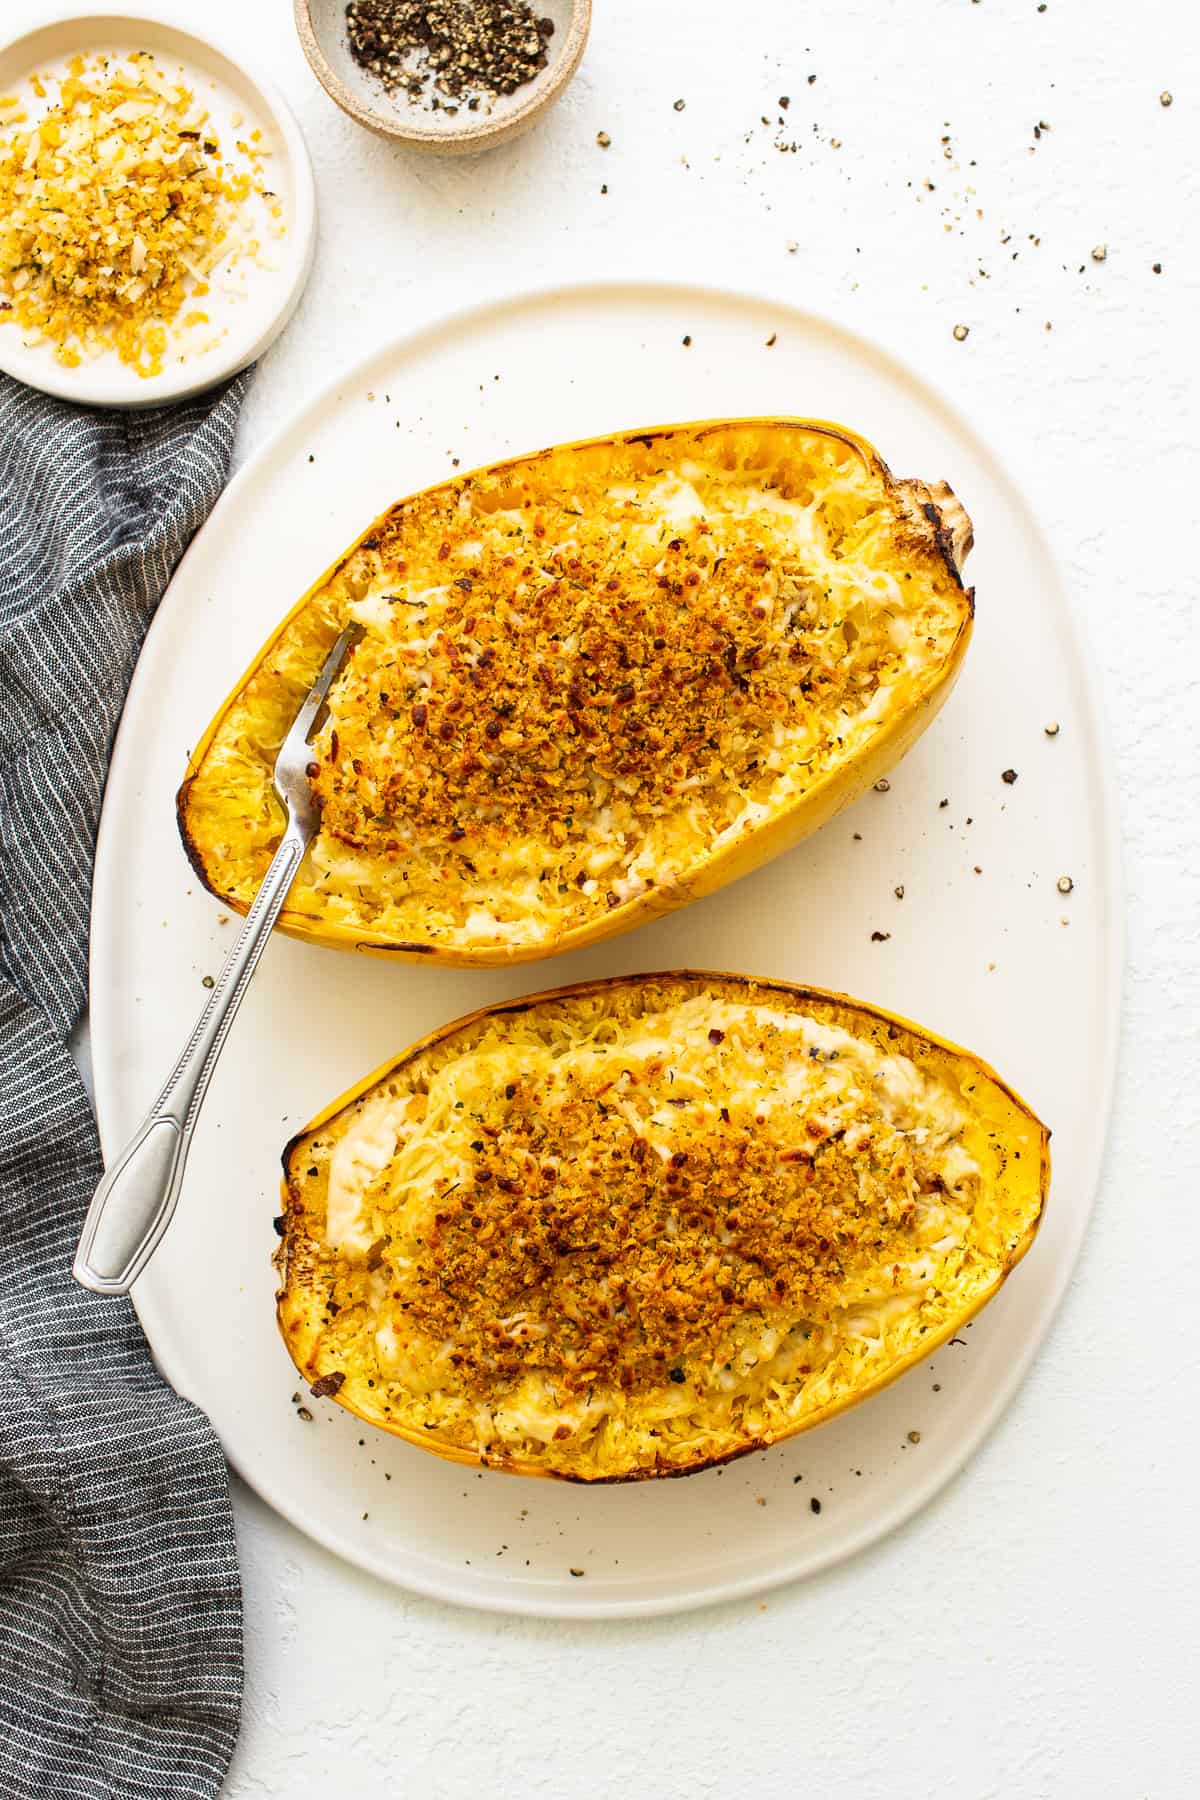 Spaghetti squash mac and cheese topped with breadcrumbs.